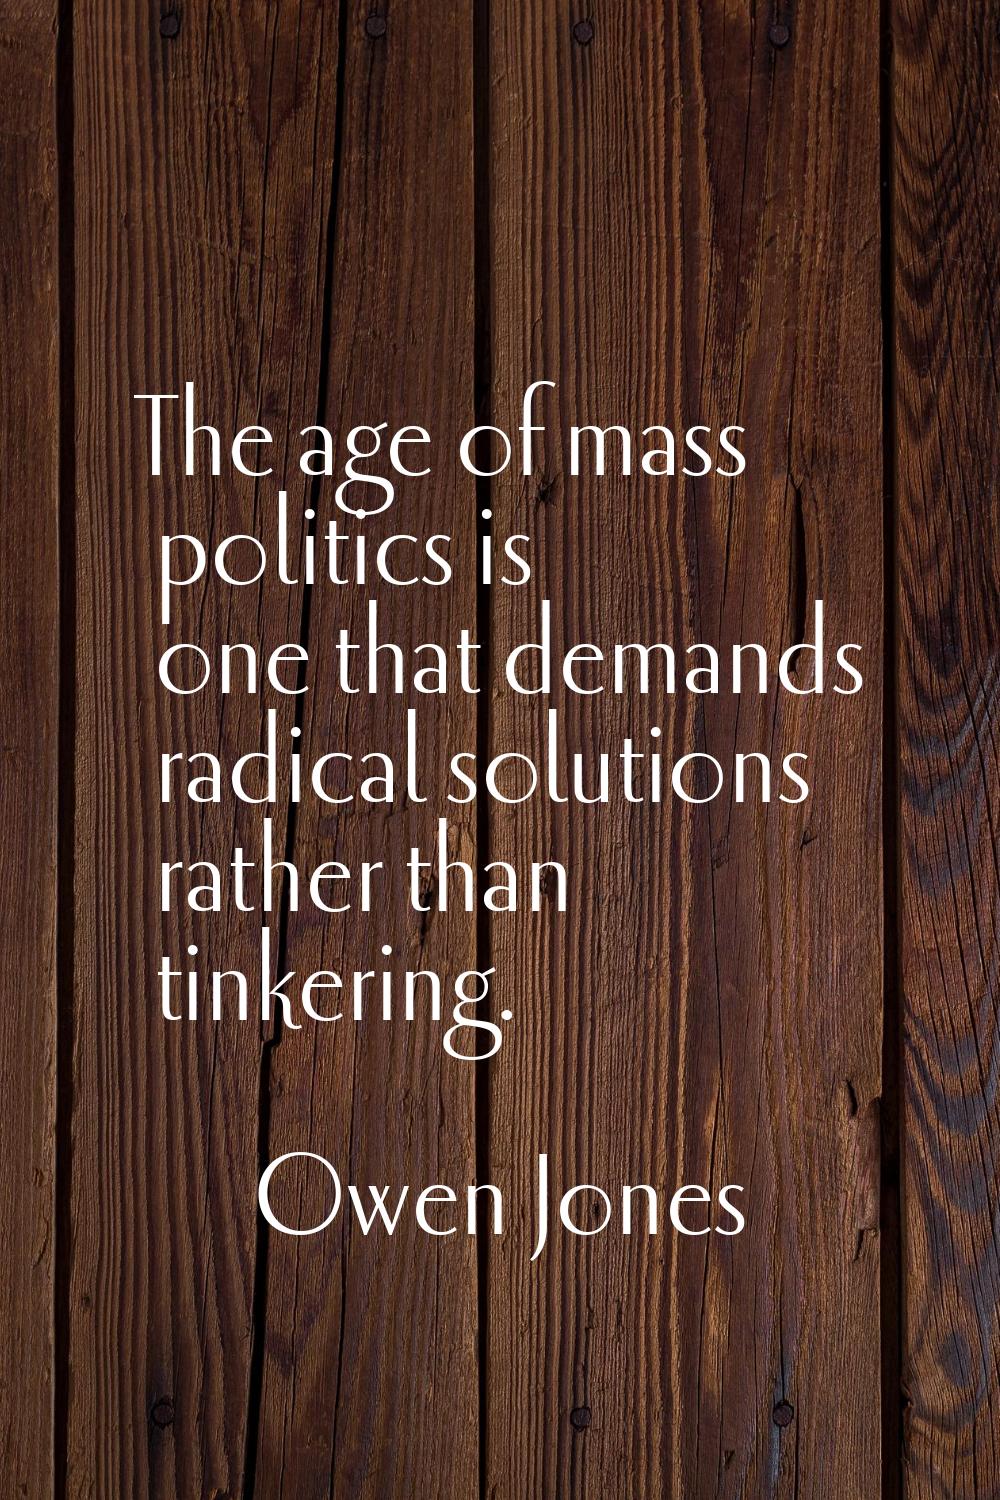 The age of mass politics is one that demands radical solutions rather than tinkering.